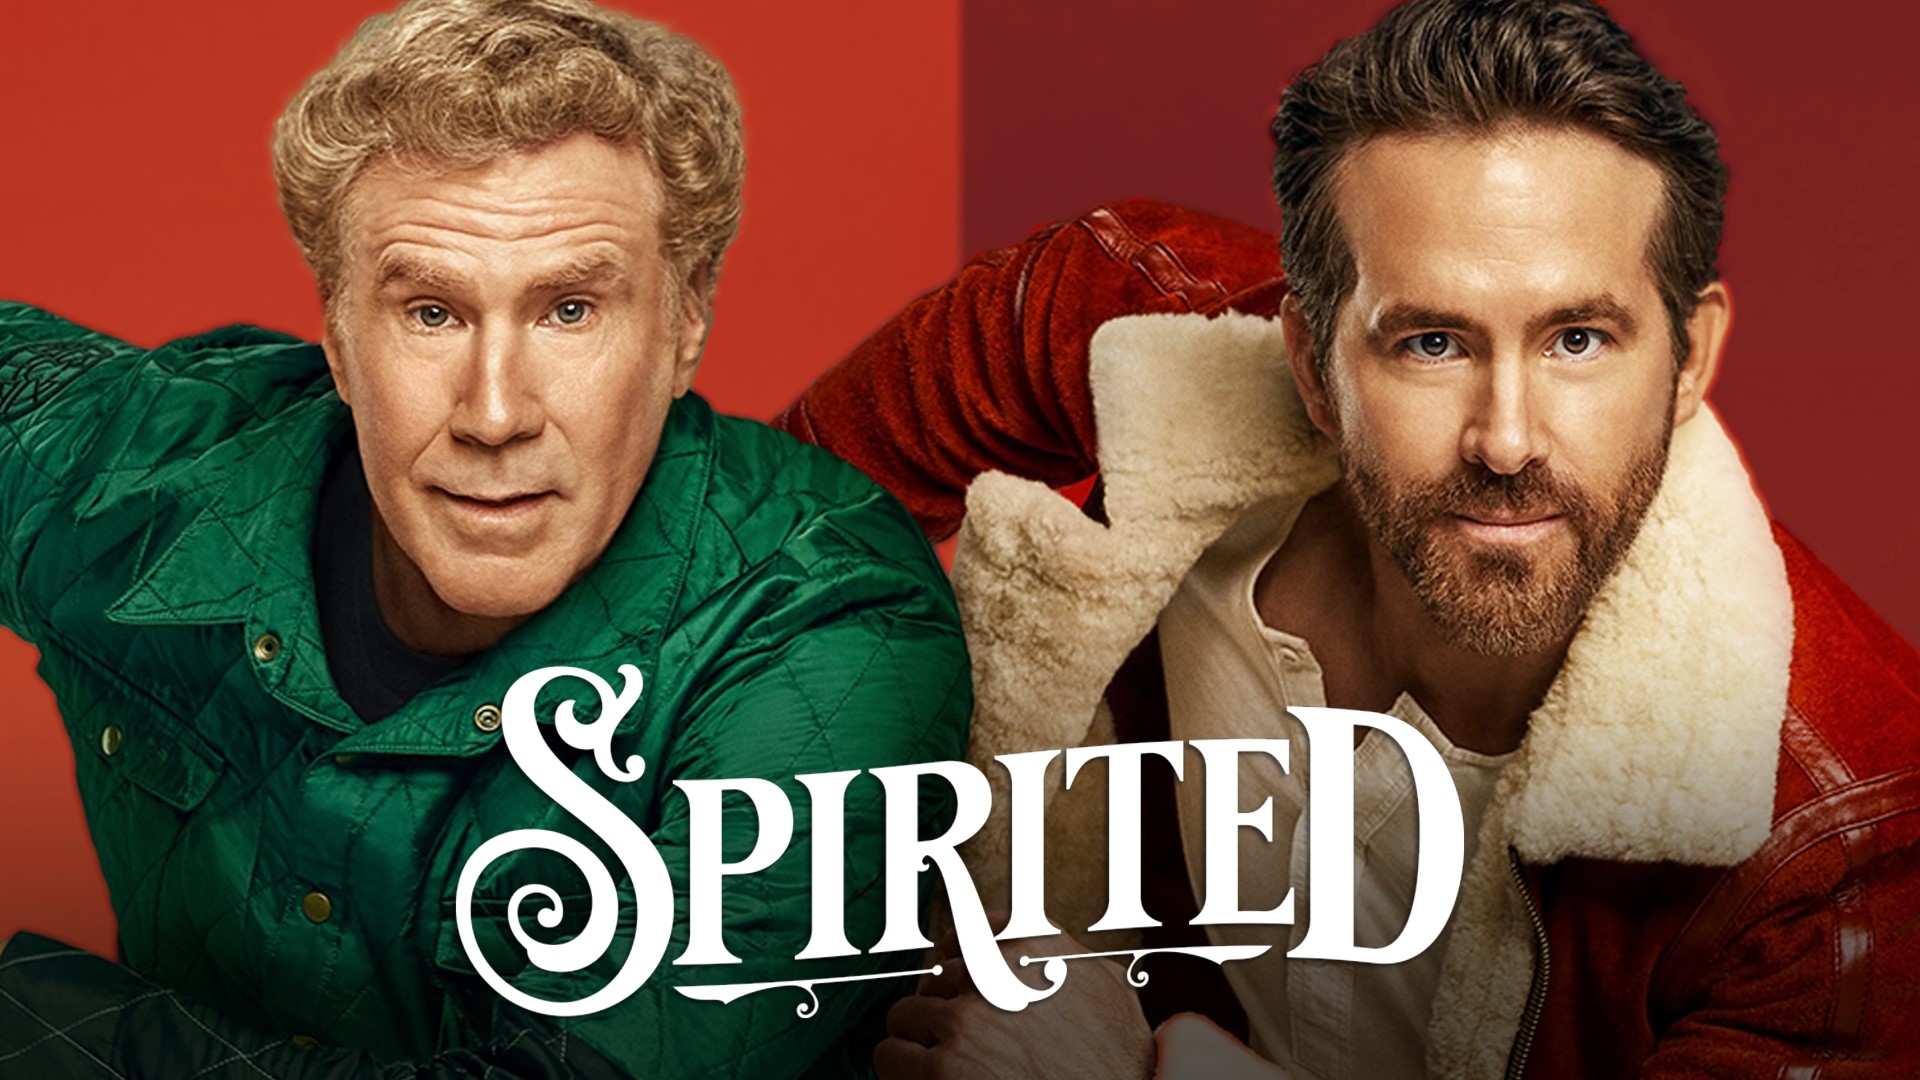 Will Ferrell and Ryan Reynolds star in Spirited, a new take on A Christmas Carol, and it just might be a new Christmas classic.